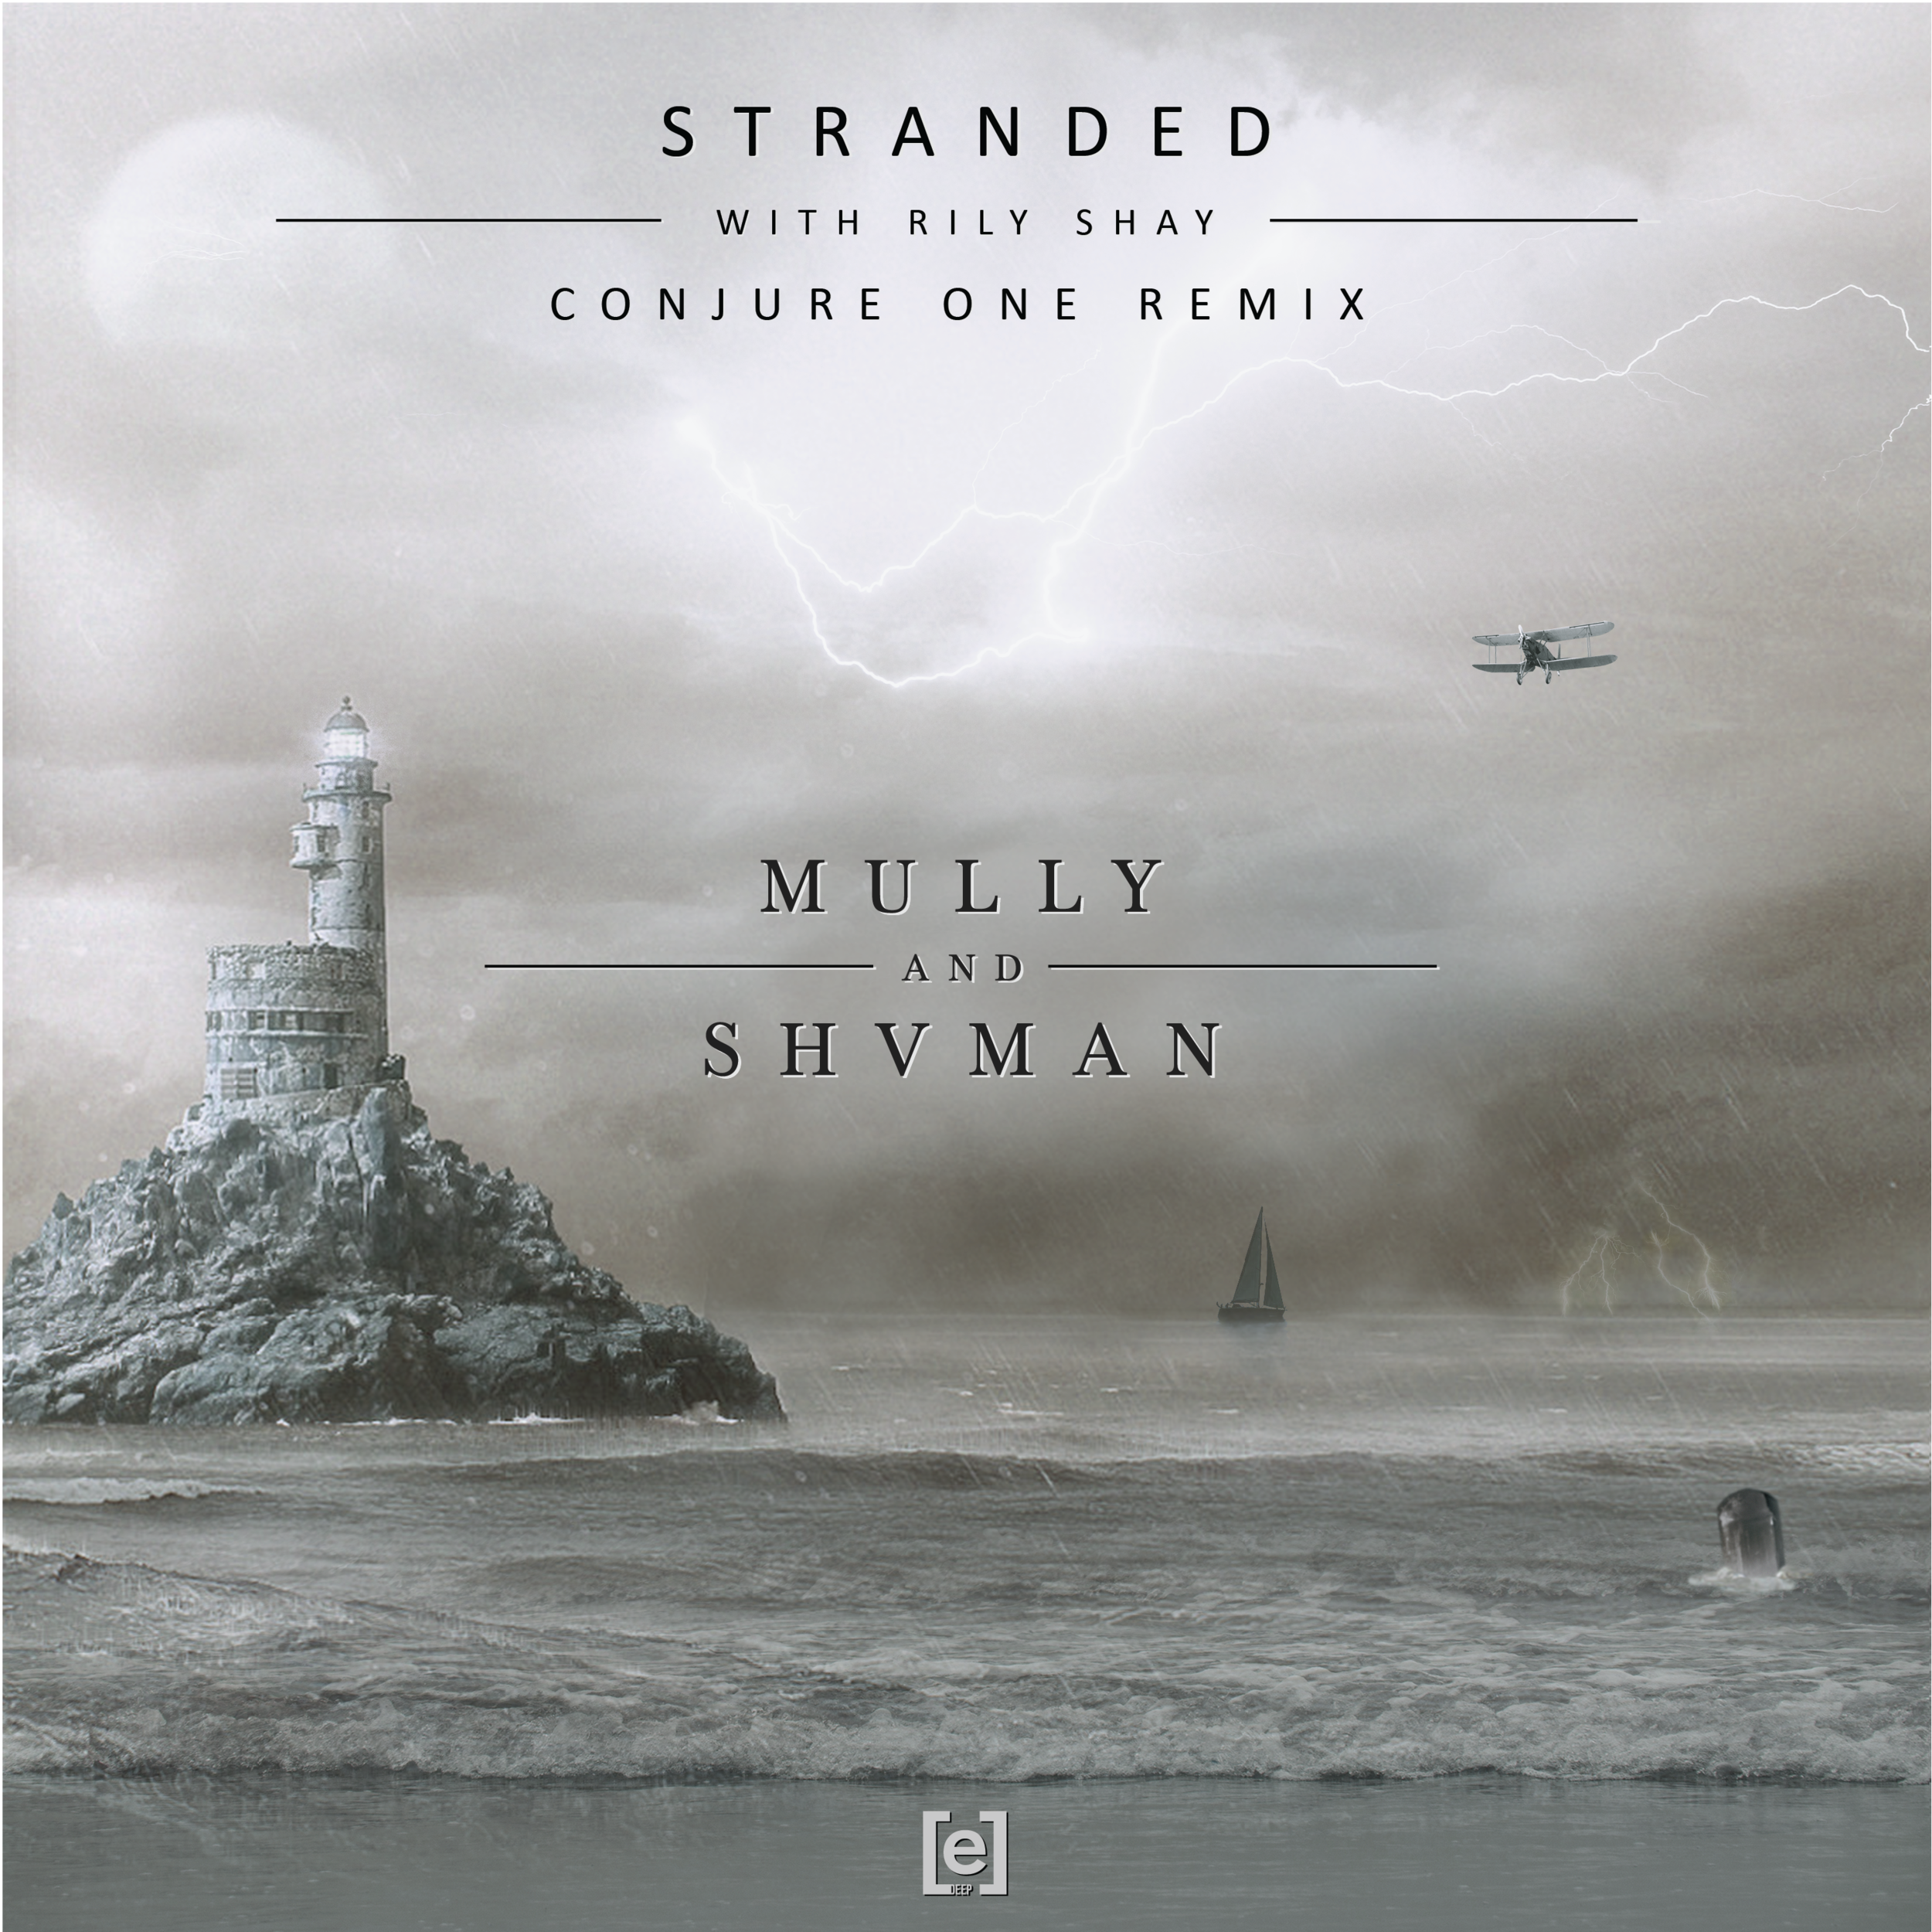 Mully & Shvman with Rily Shay - Stranded (Conjure One Remix) COVER.png